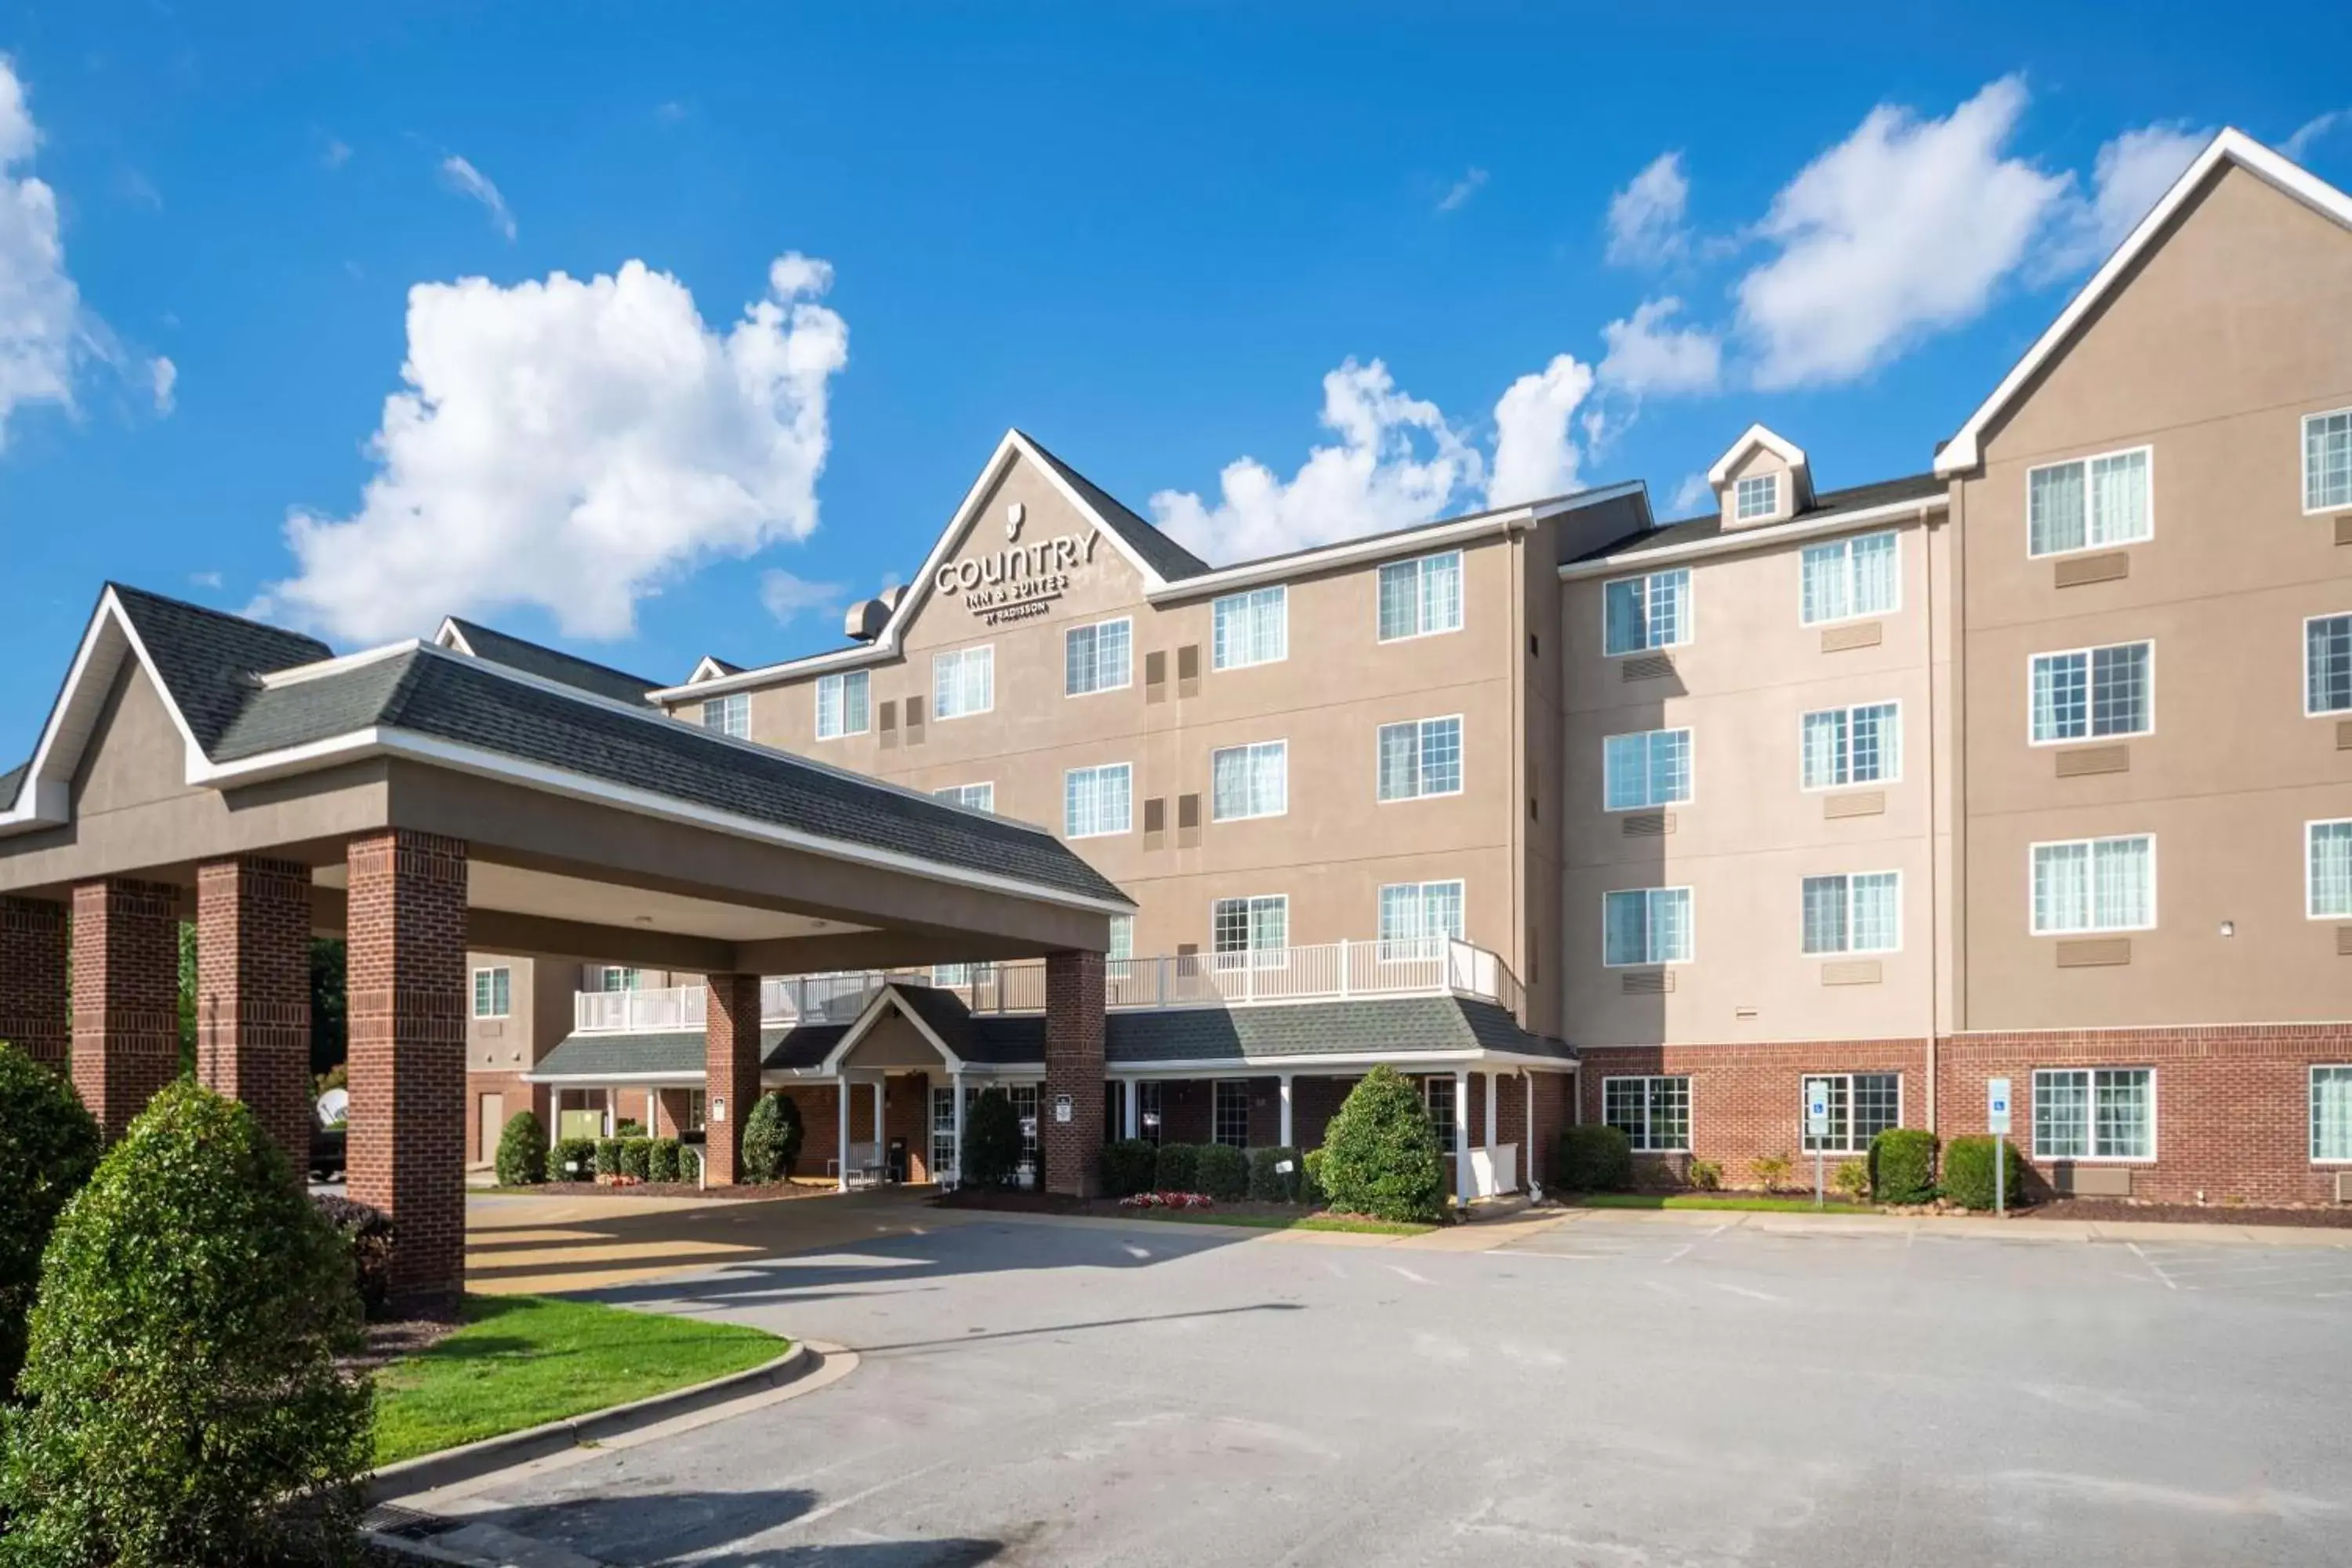 Property Building in Country Inn & Suites by Radisson, Rocky Mount, NC